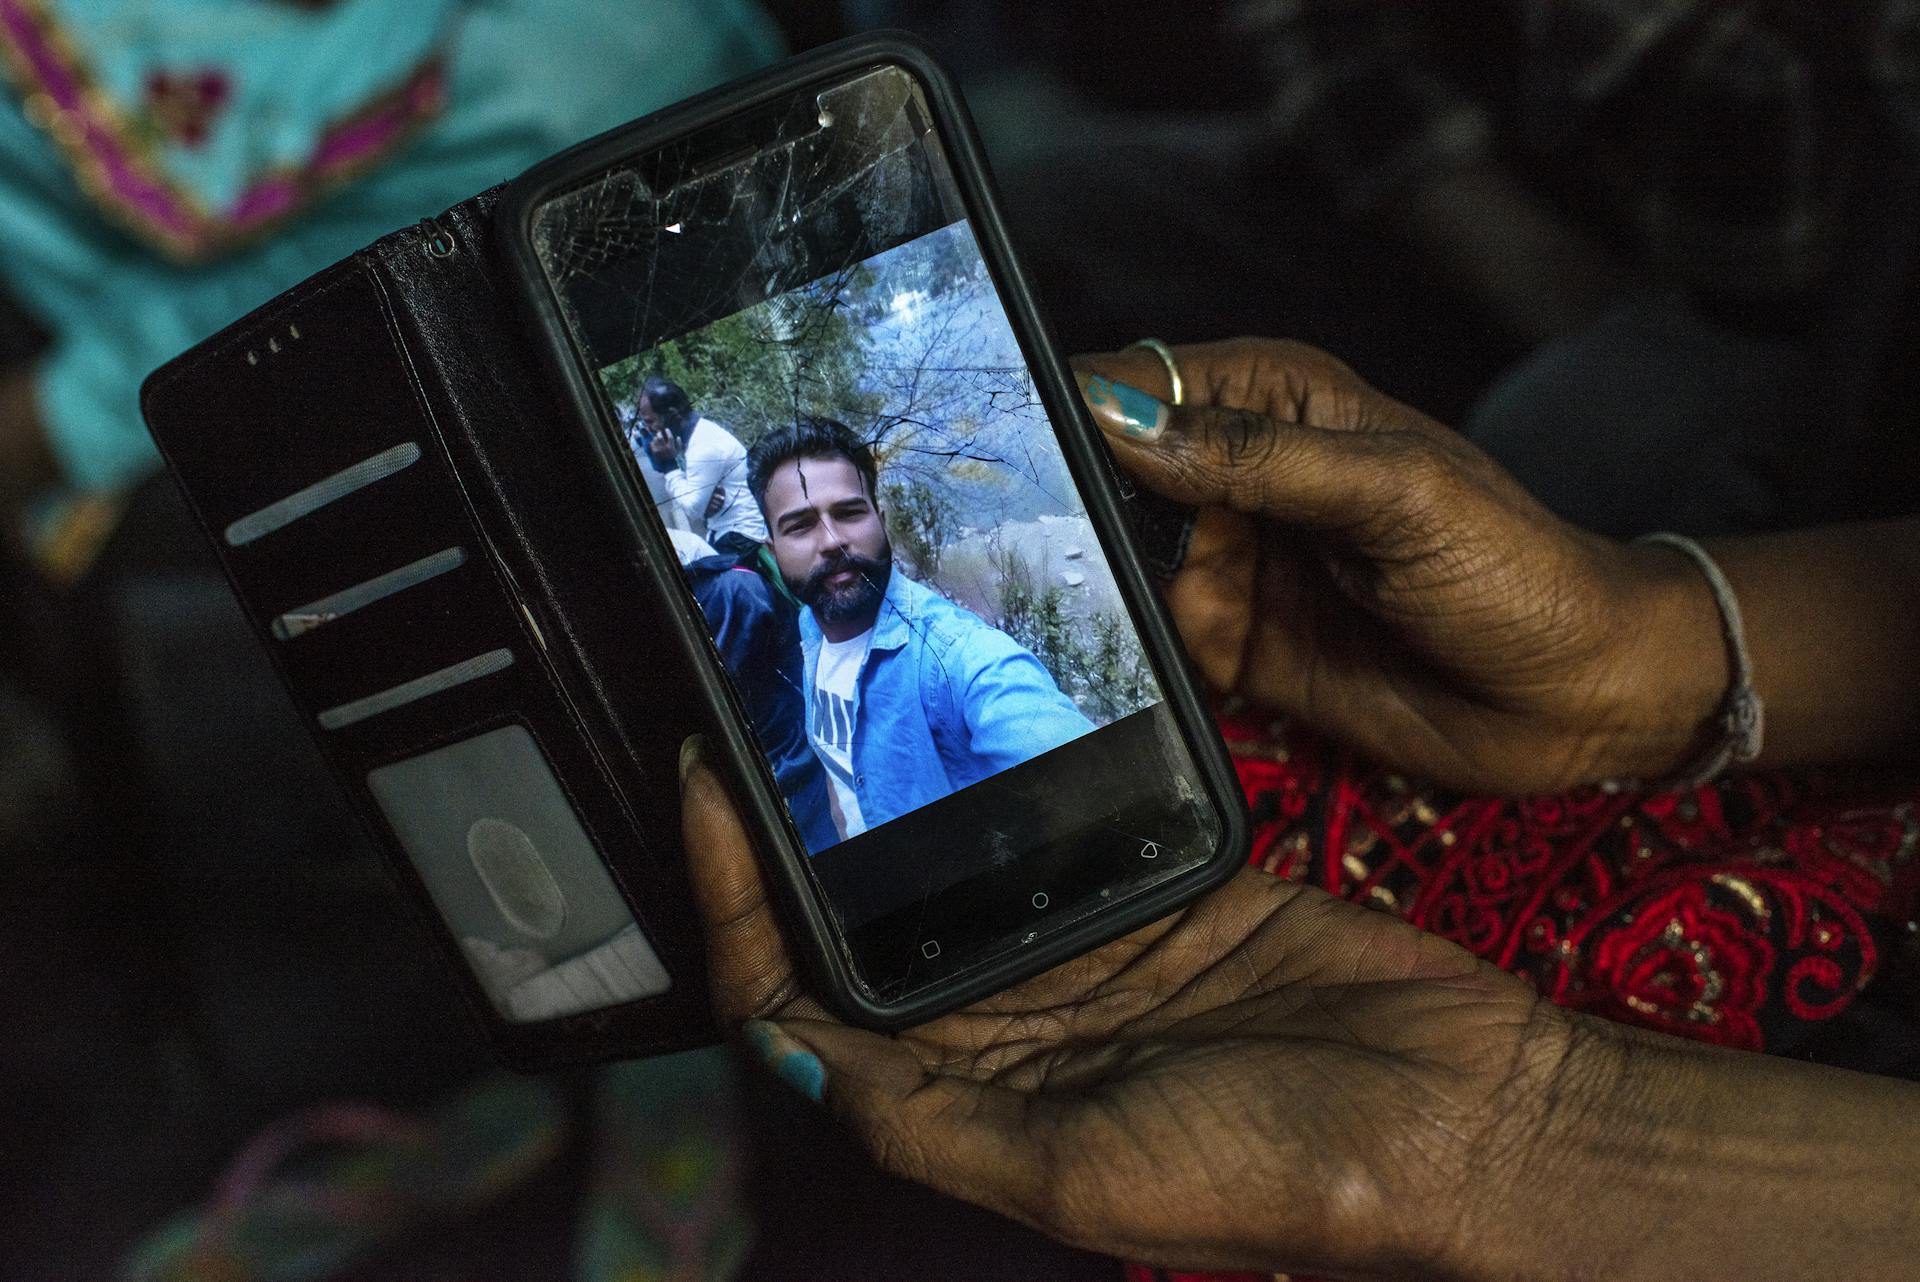 Kirandeep showing a photograph of her brother Jobandeep on her phone. Credit: Marco Valle